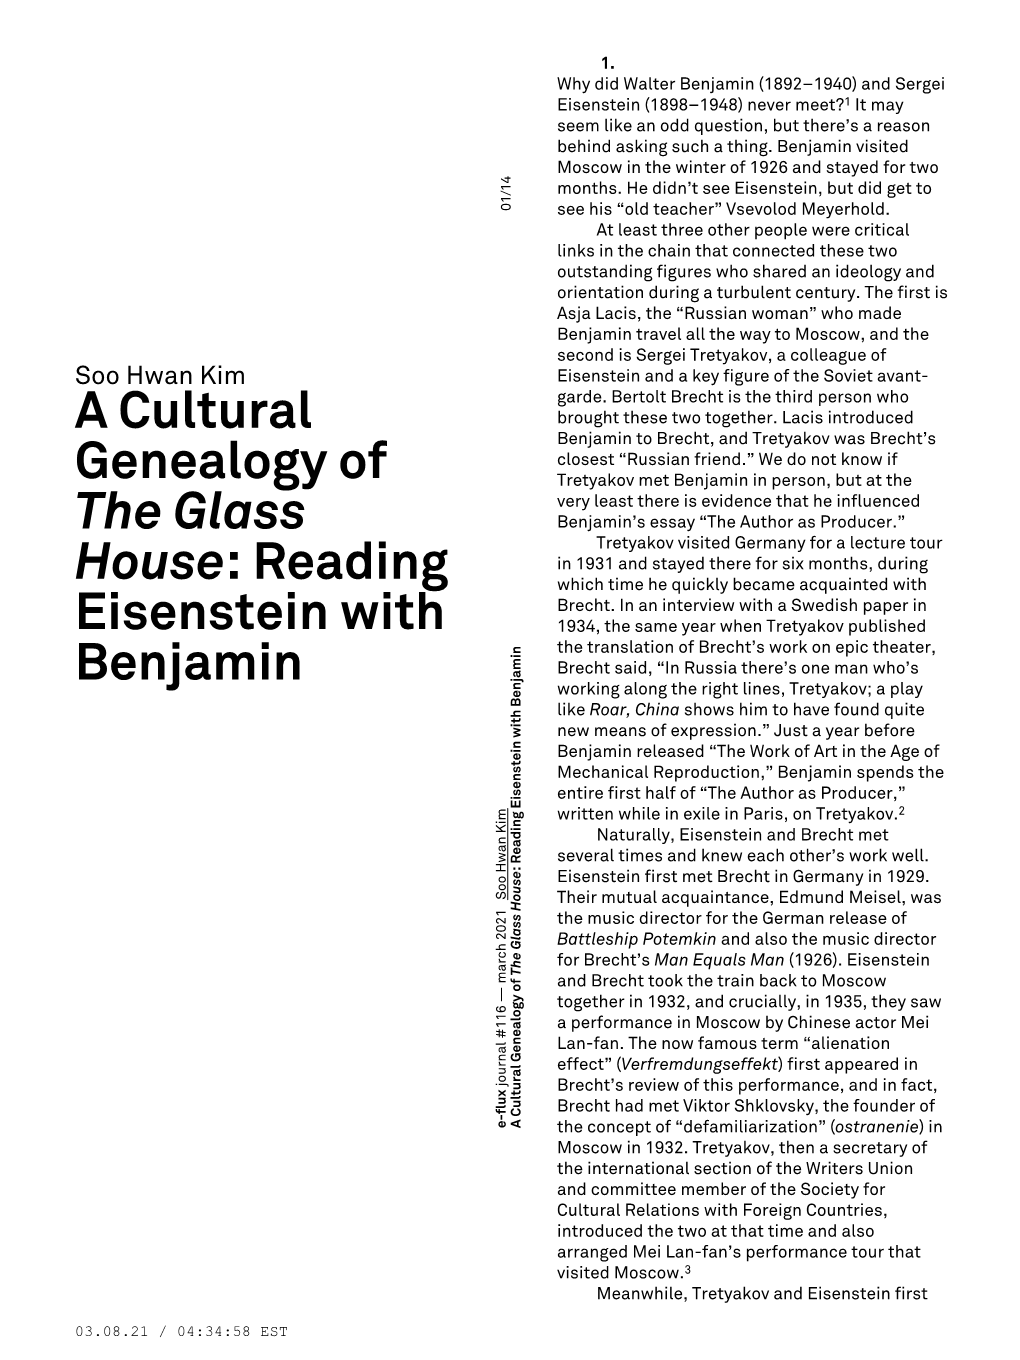 A Cultural Genealogy of the Glass House: Reading Eisenstein with Benjamin